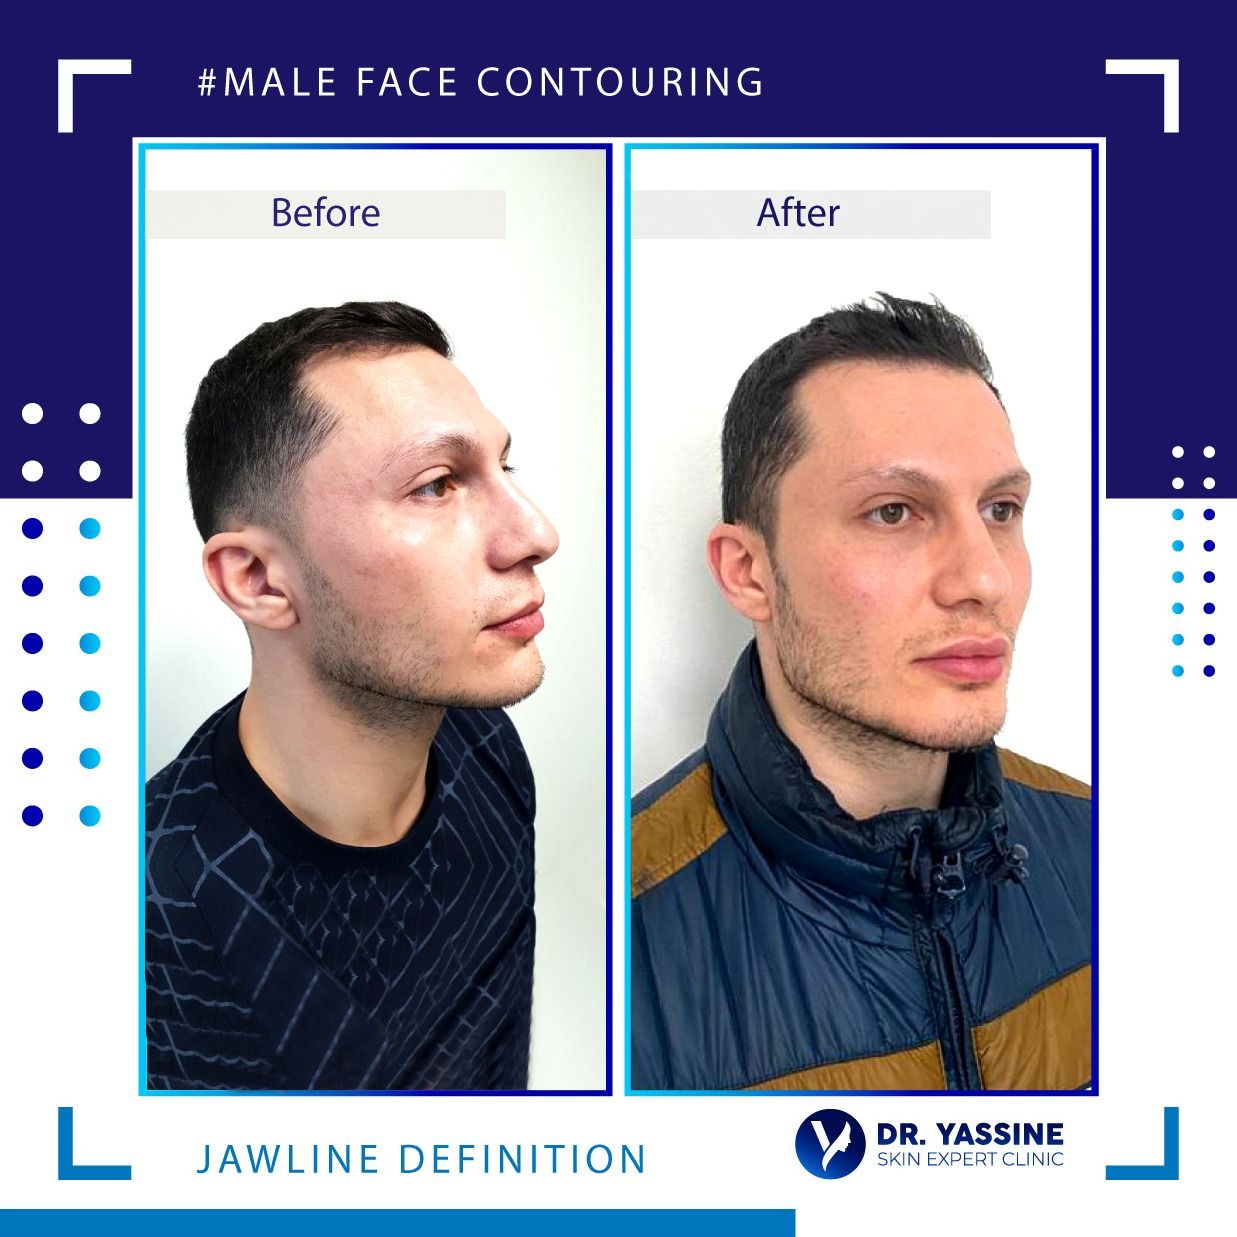 Male face contouring